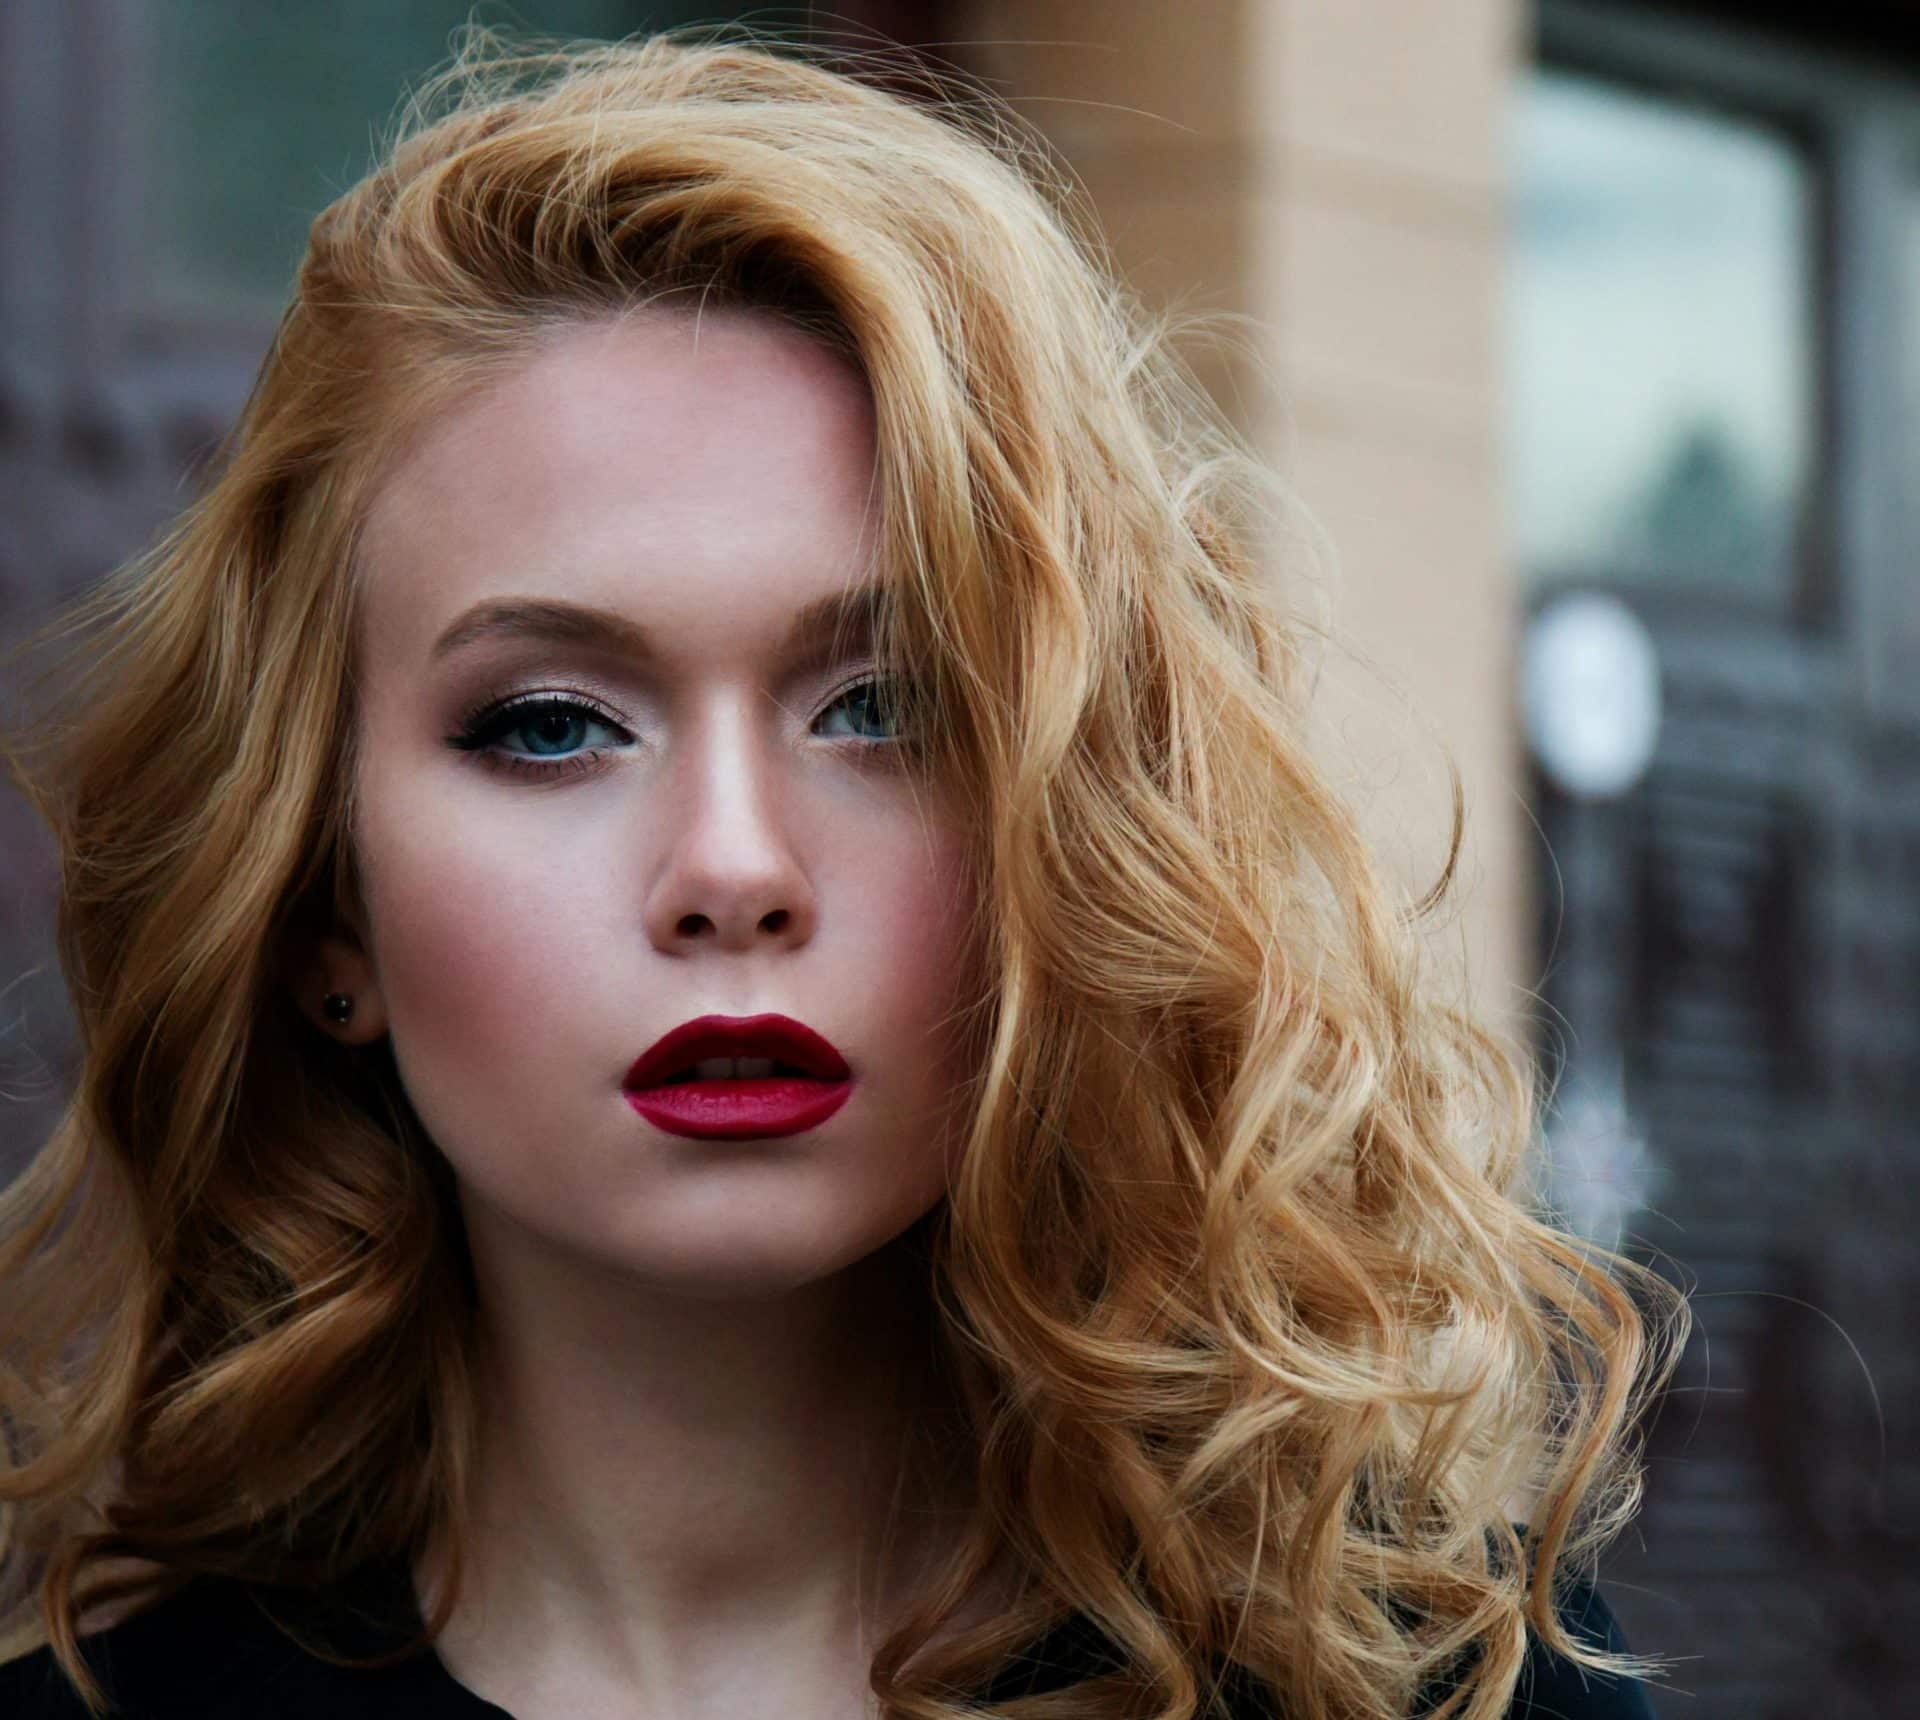 A woman's face with auburn curly hair and bright red lip stick